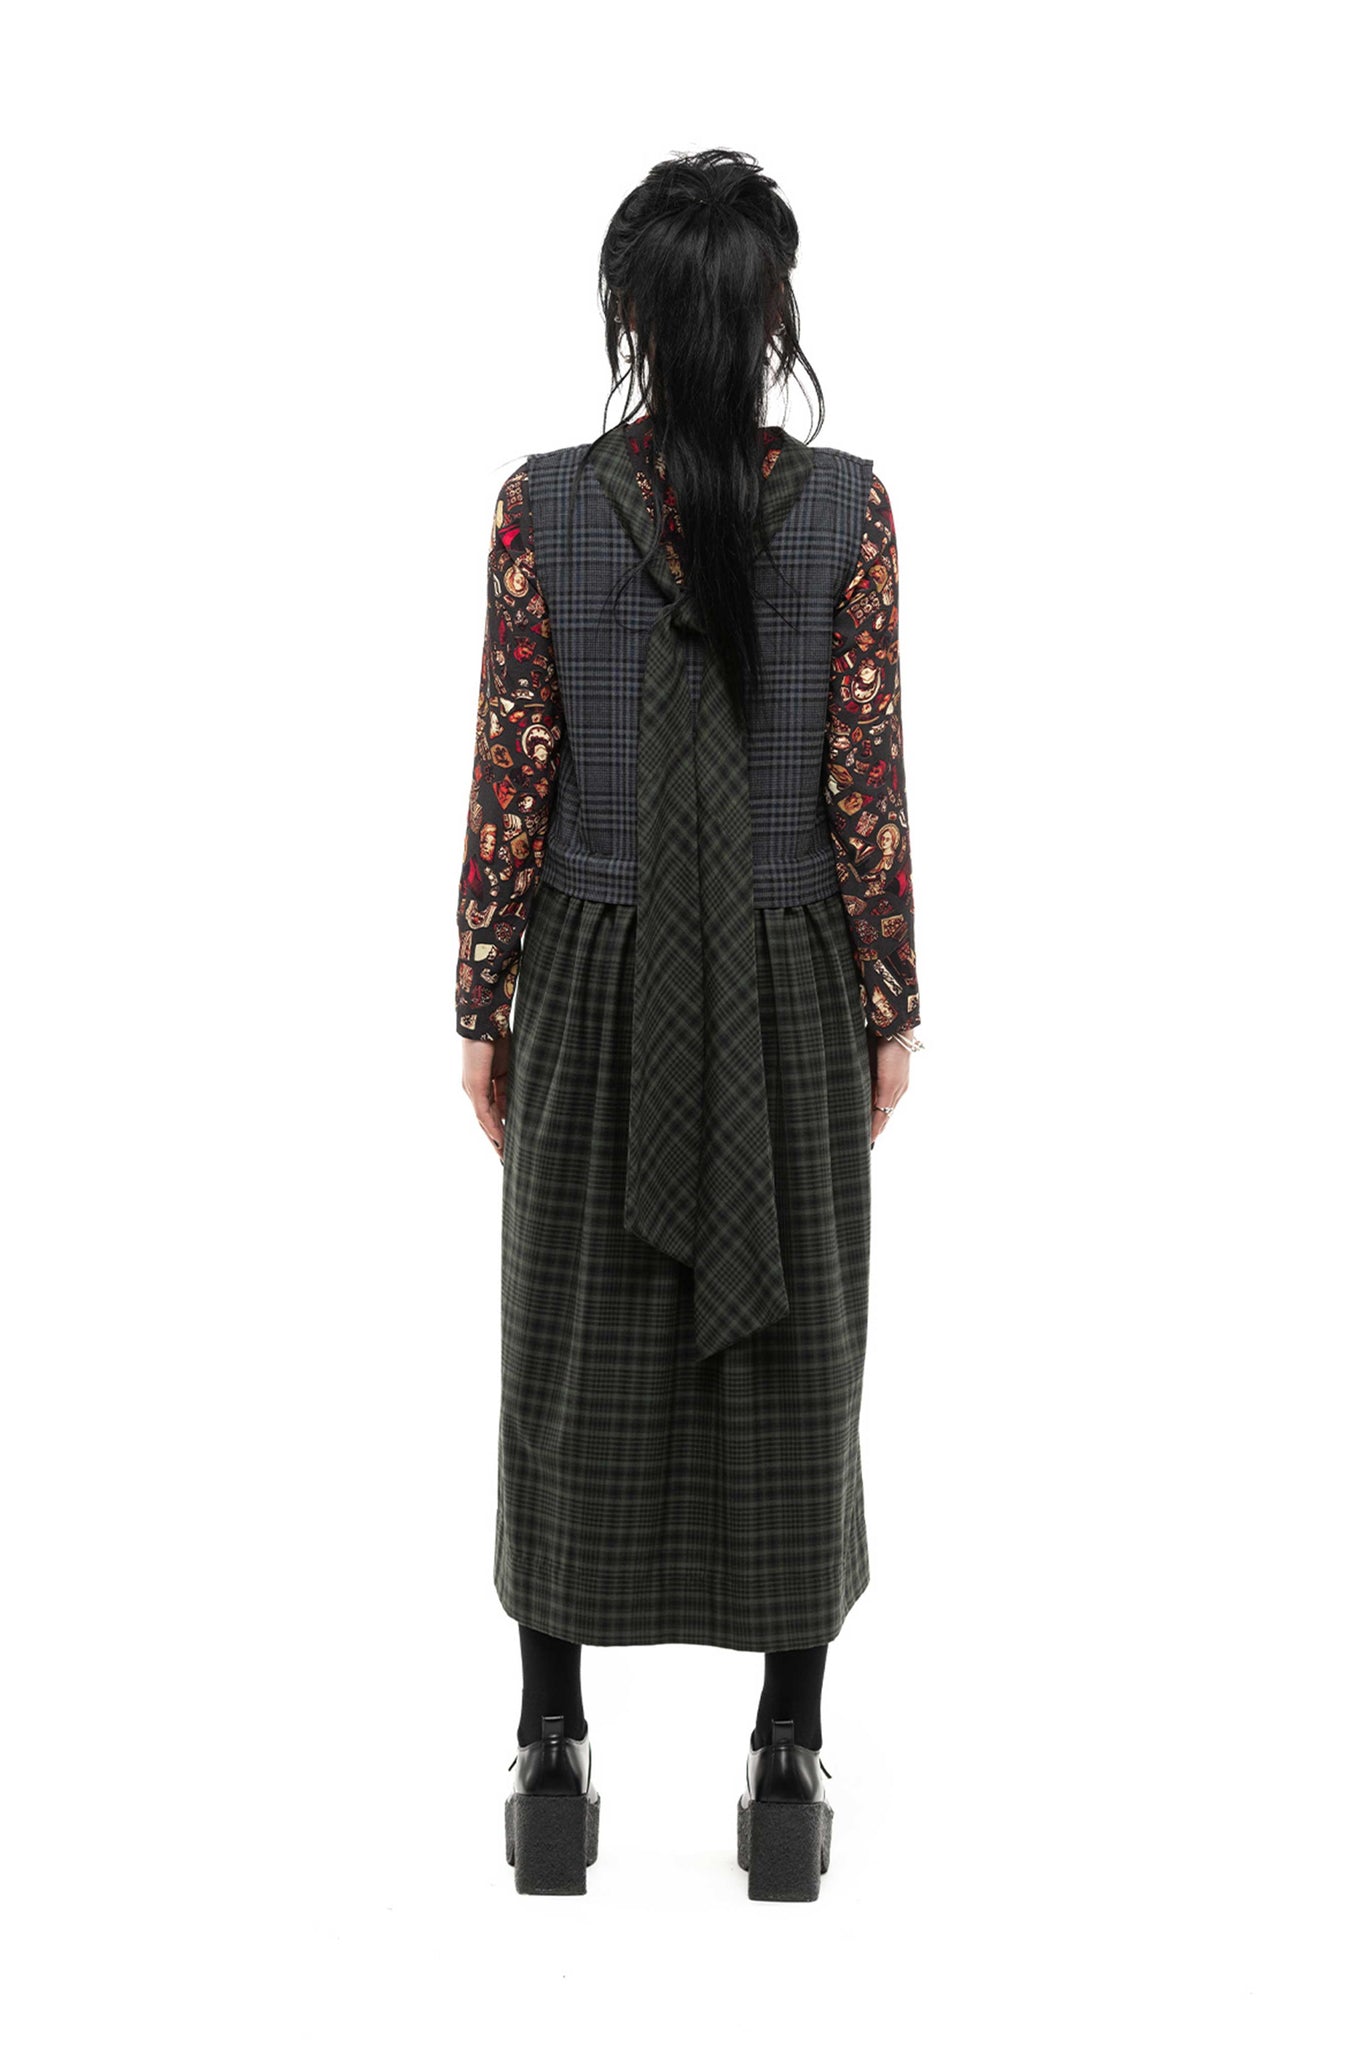 Double Vision Dress | Plaid Suiting | Mixed Plaid